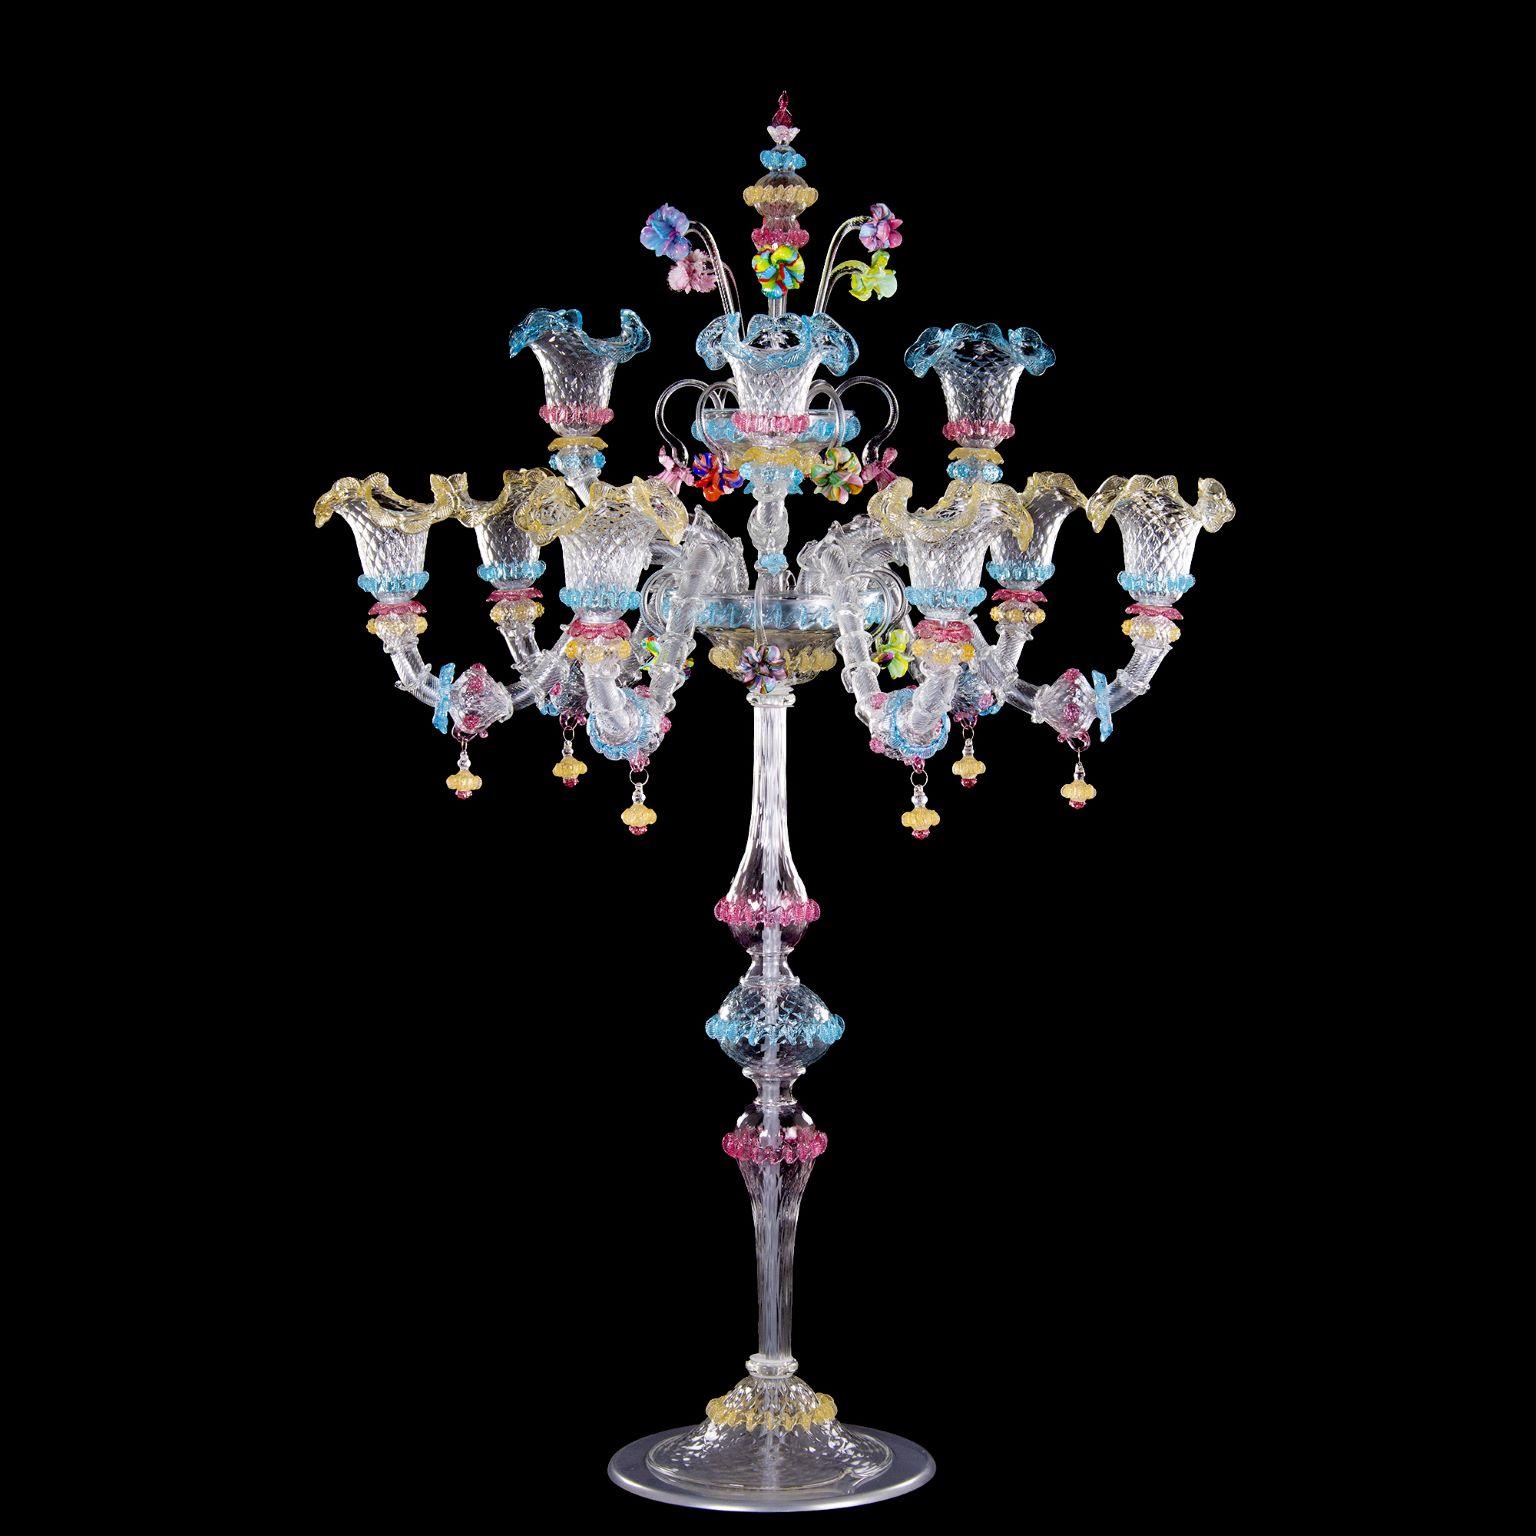 Big luxury rezzonico flambeau 6+3 arms, crystal Murano glass, rich of multi-color details nickel structure by Multiforme.
This artistic table lamp is an elegant and delicate lighting work, colored with pastel tones. The structure is a combination of